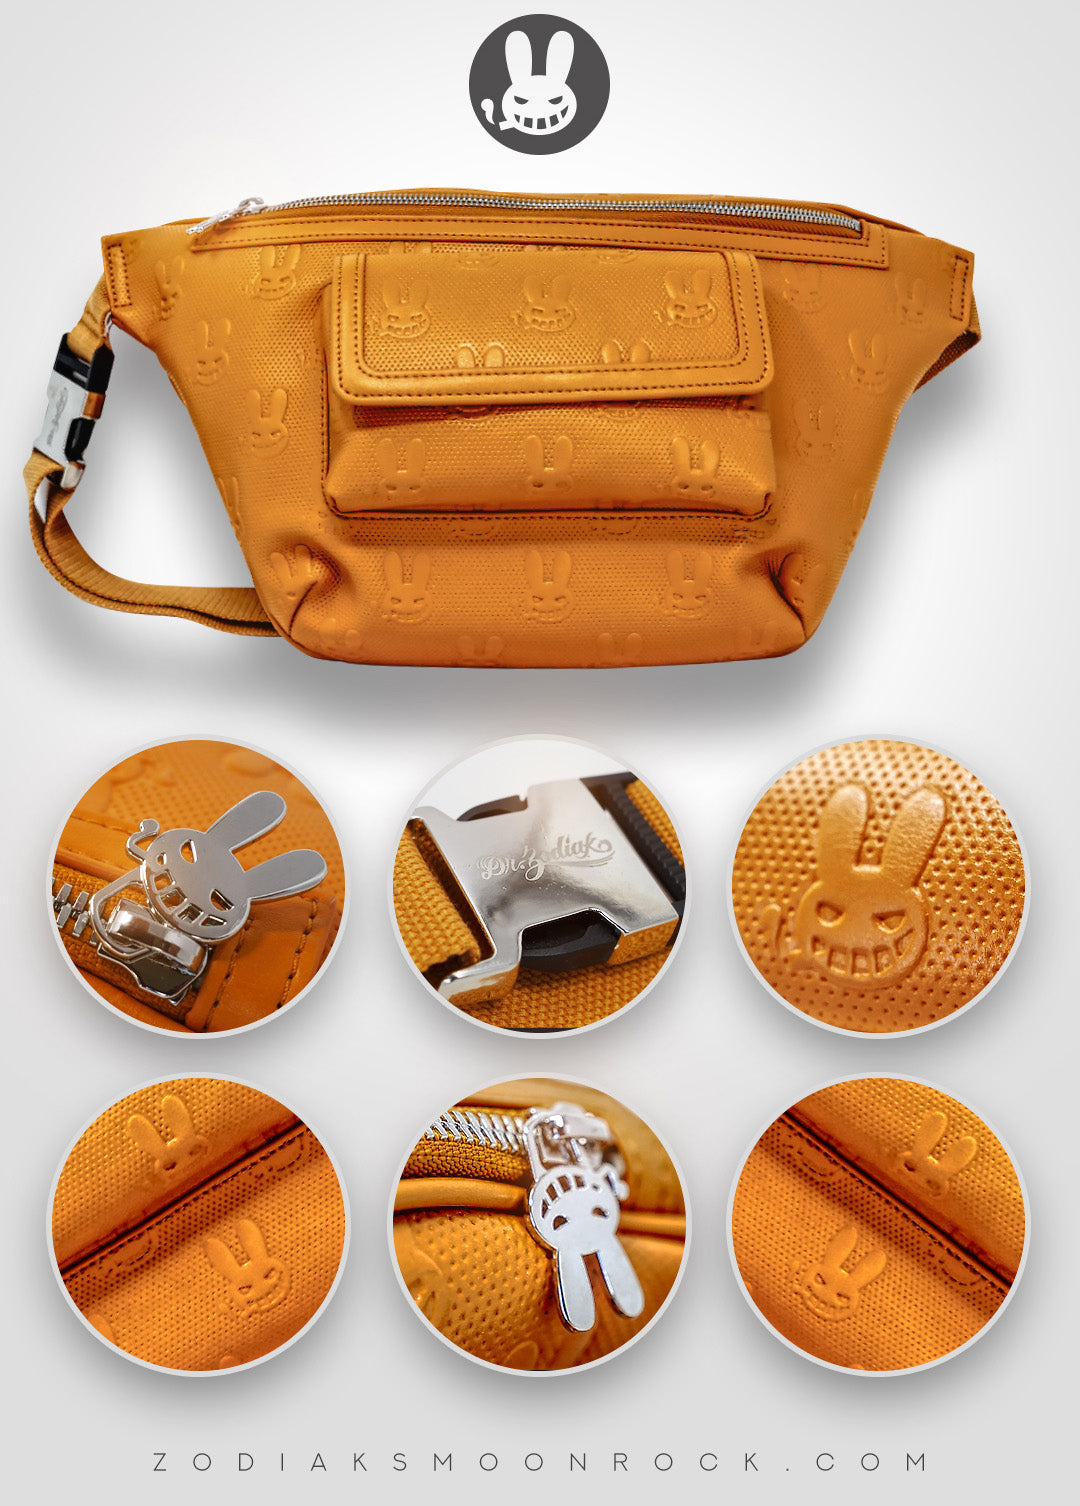 Dr. Zodiak's Moonrock Limited Edition Leather Cross Body Bag -Butterscotch